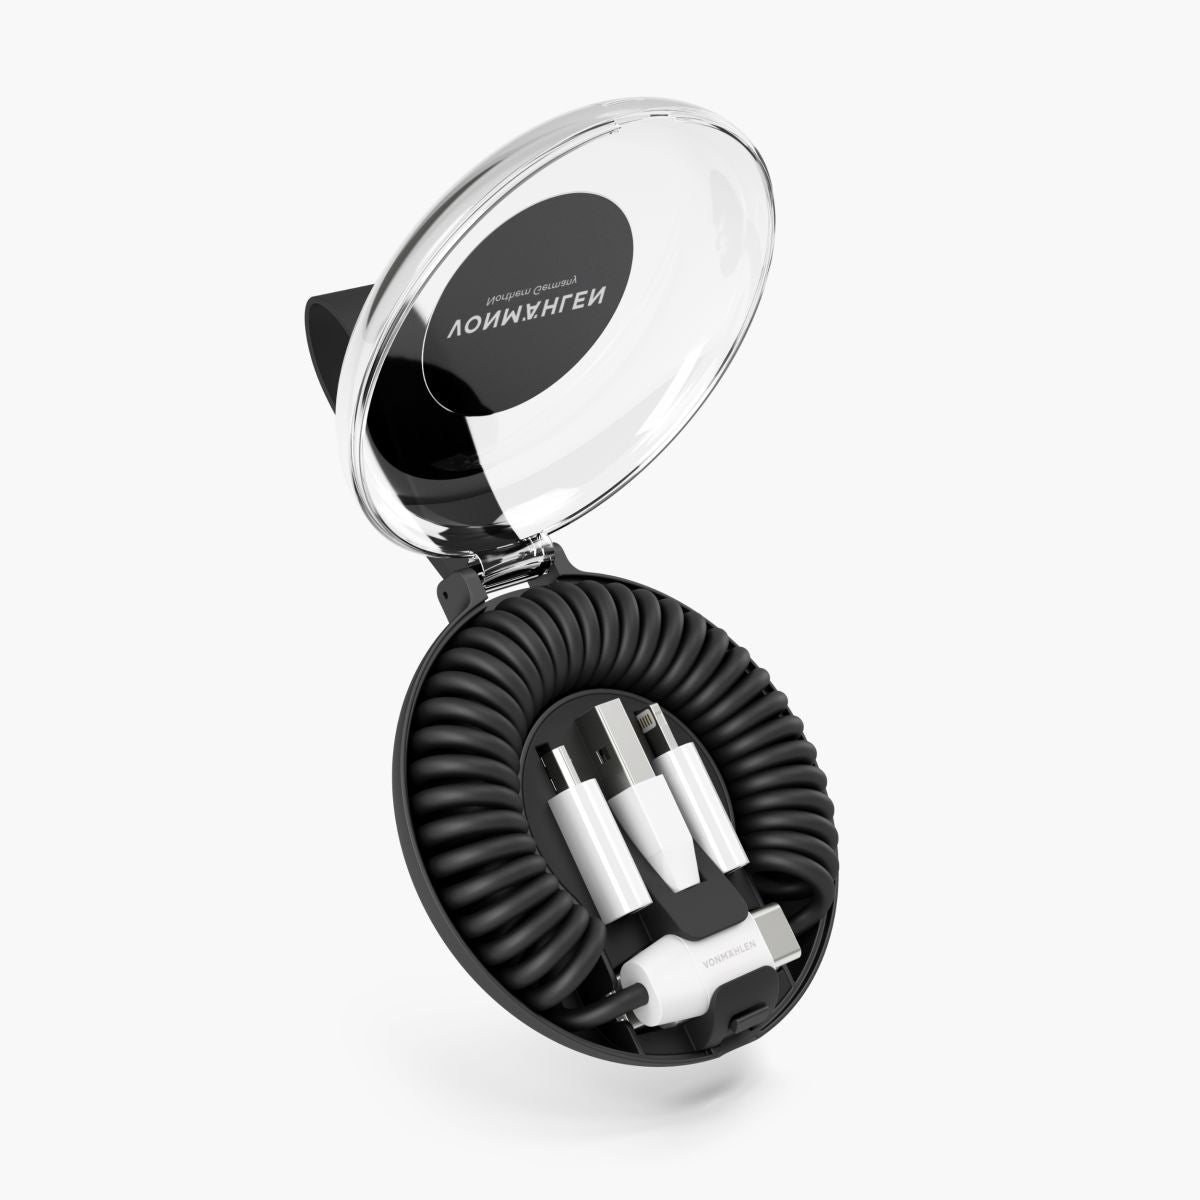 Vonmahlen allroundo® c - The All-in-One Charging Cable